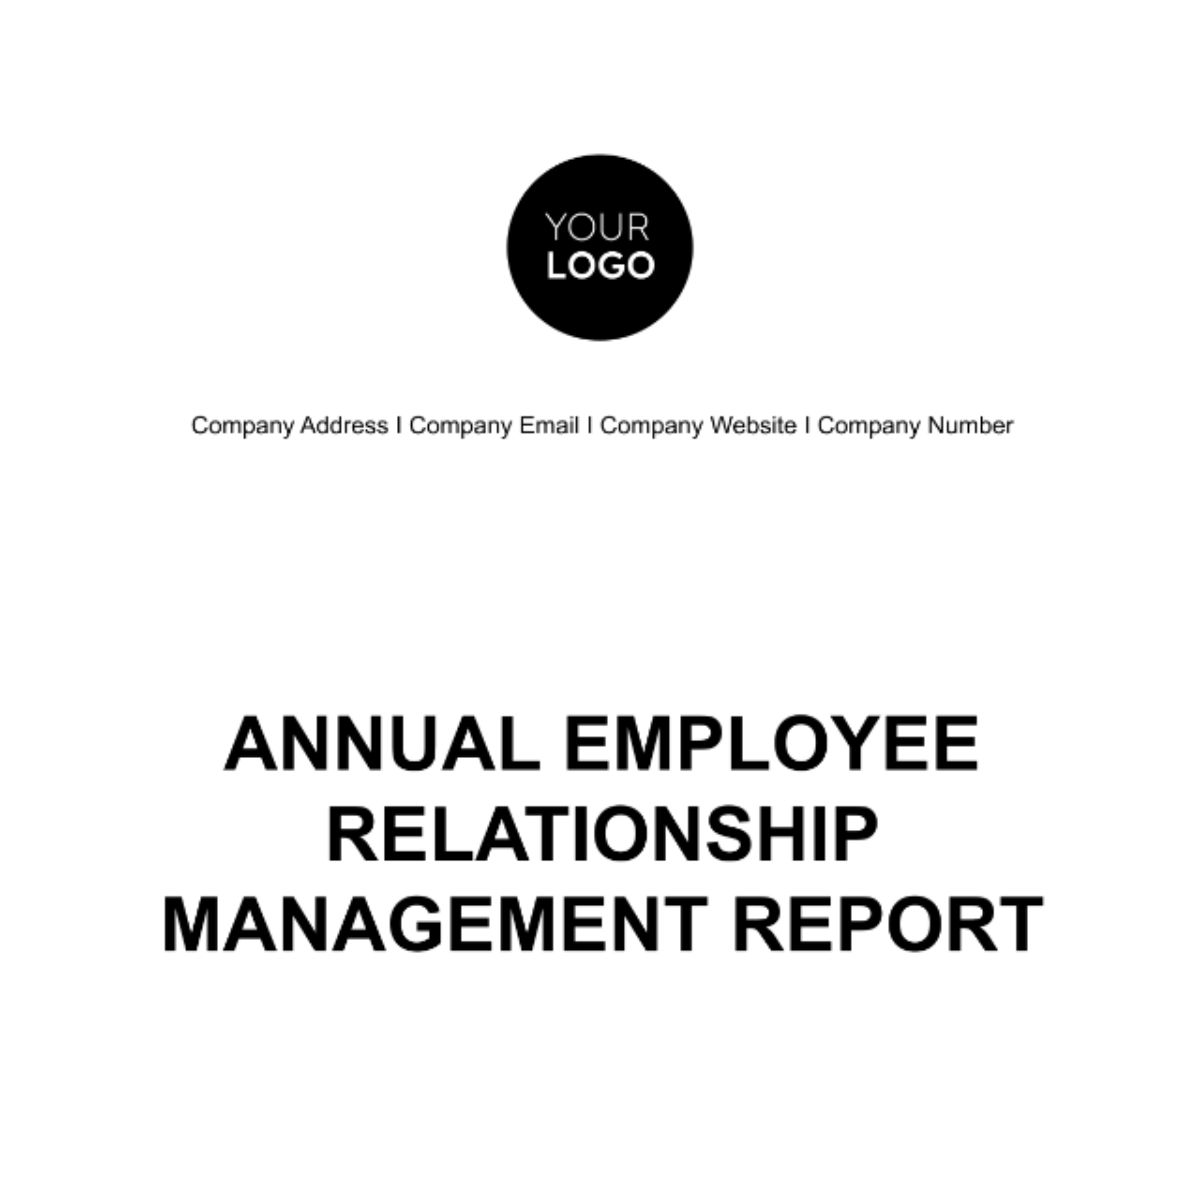 Annual Employee Relationship Management Report HR Template